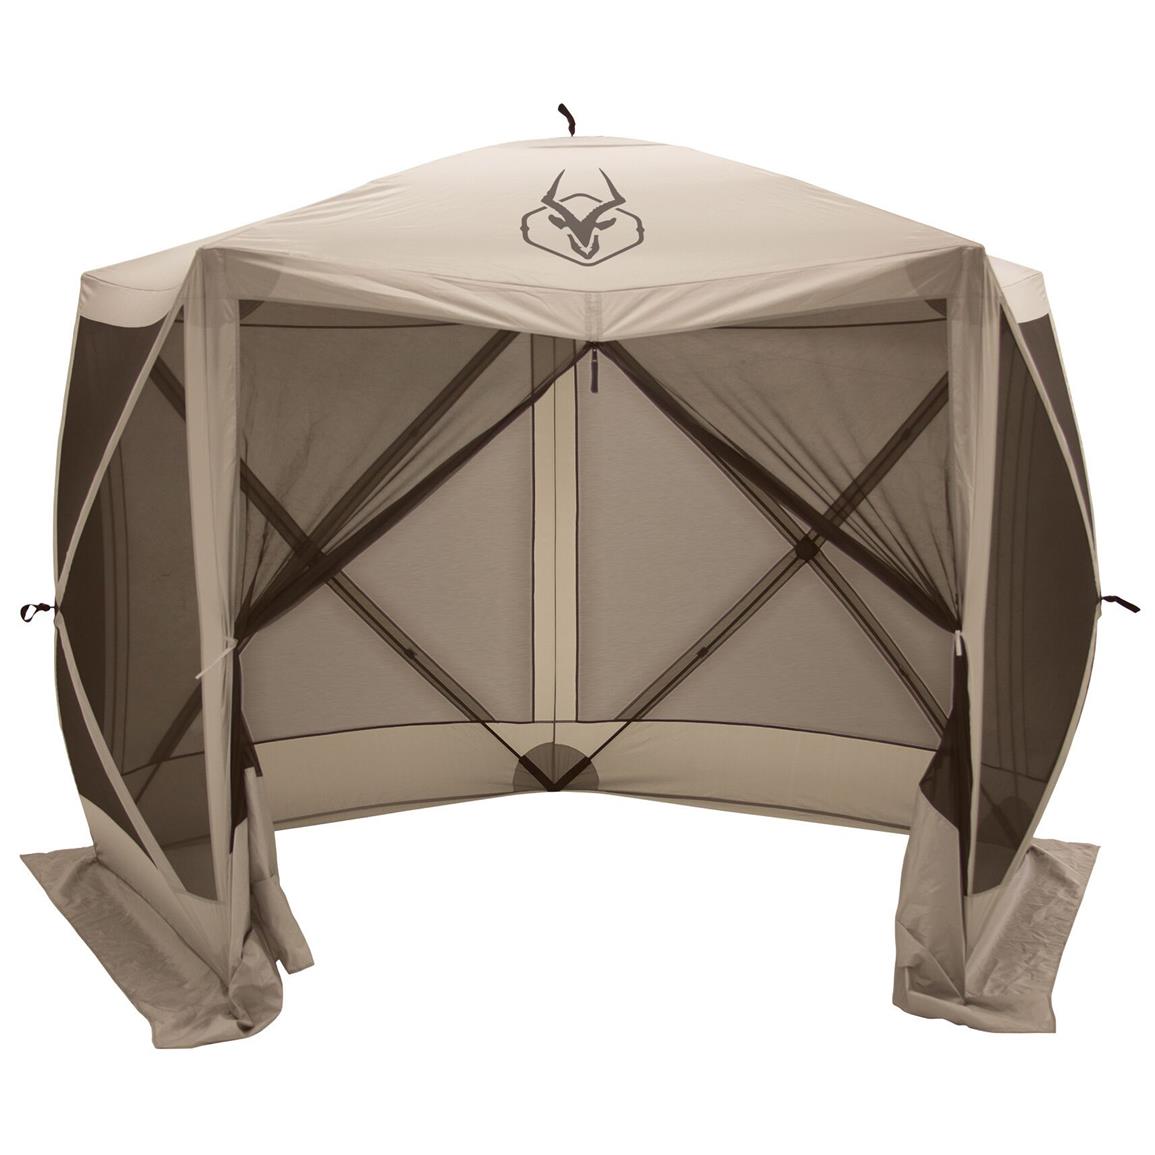 Gazelle 5 Sided Portable Screen Tent